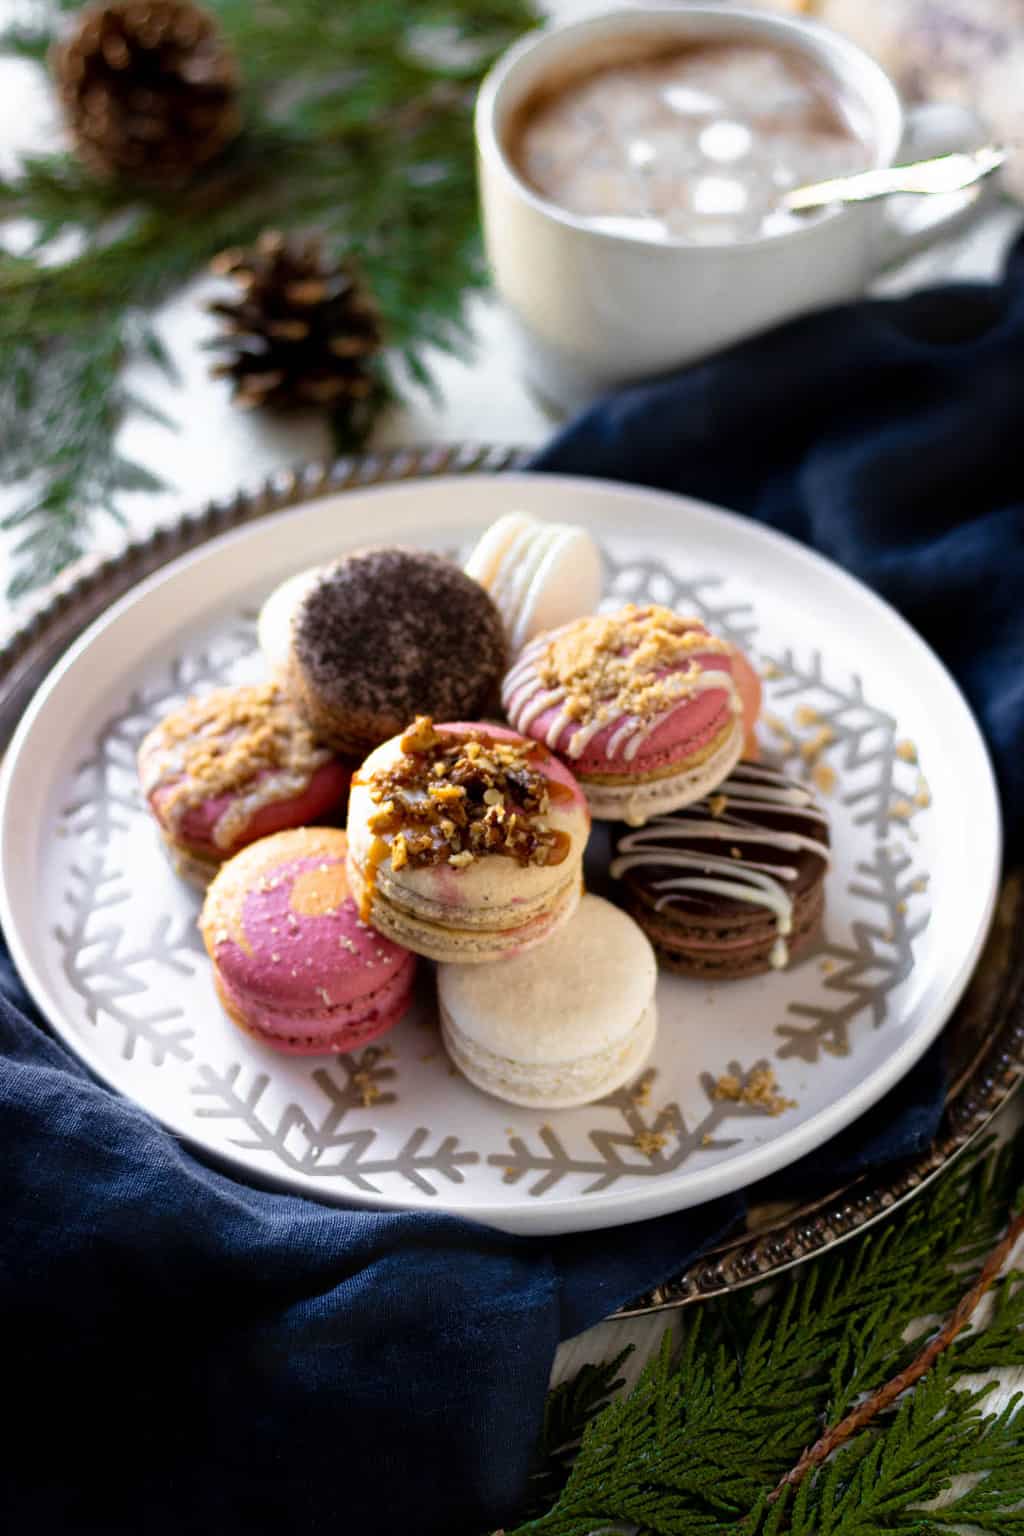 A platter of macarons with hot chocolate and evergreen bows in the background.